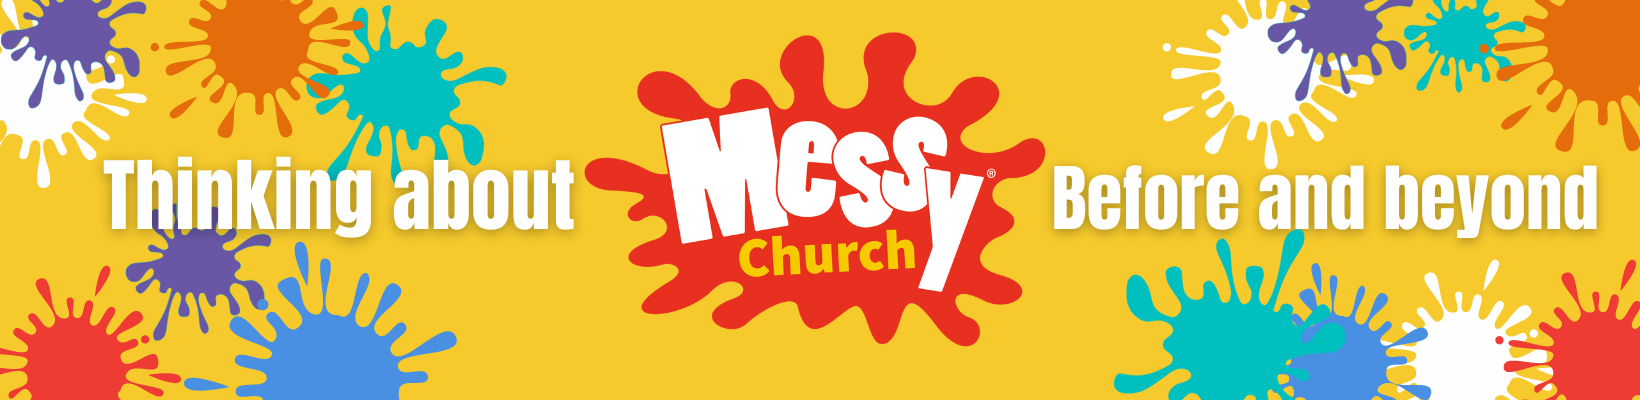 Thinking About Messy Church: Before and Beyond